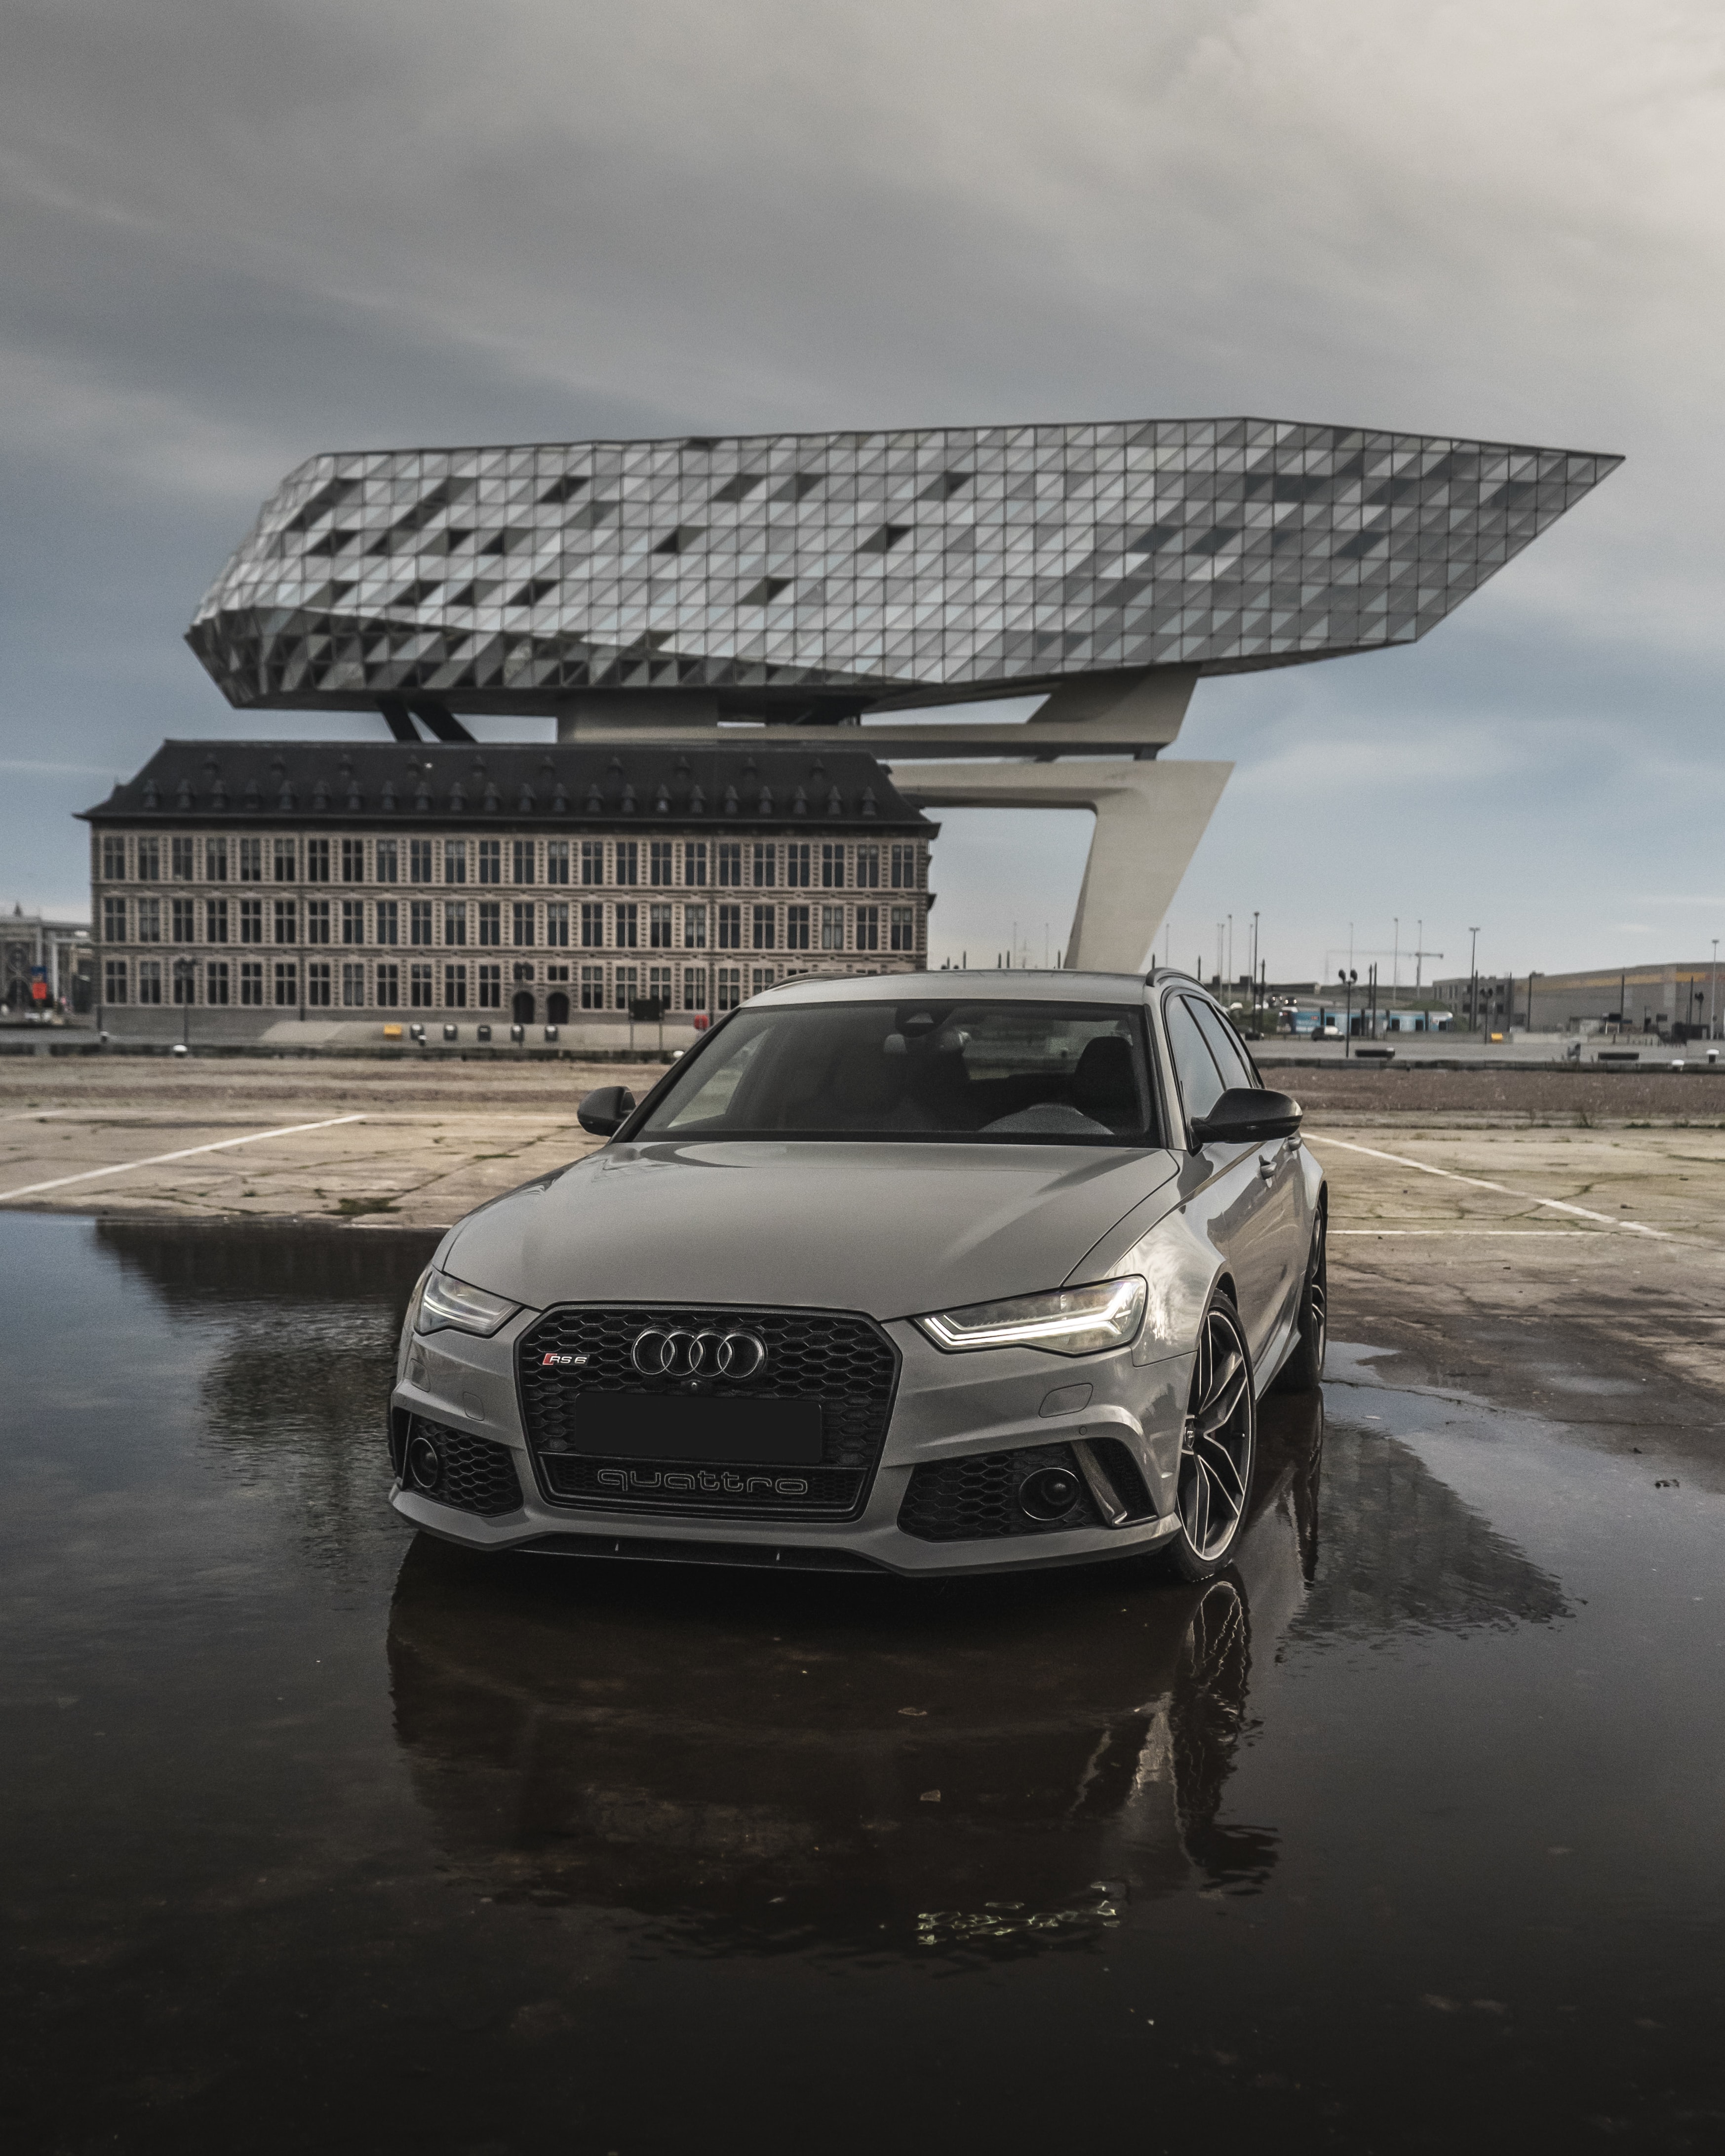 108316 free wallpaper 240x320 for phone, download images audi, cars, audi rs6, grey 240x320 for mobile